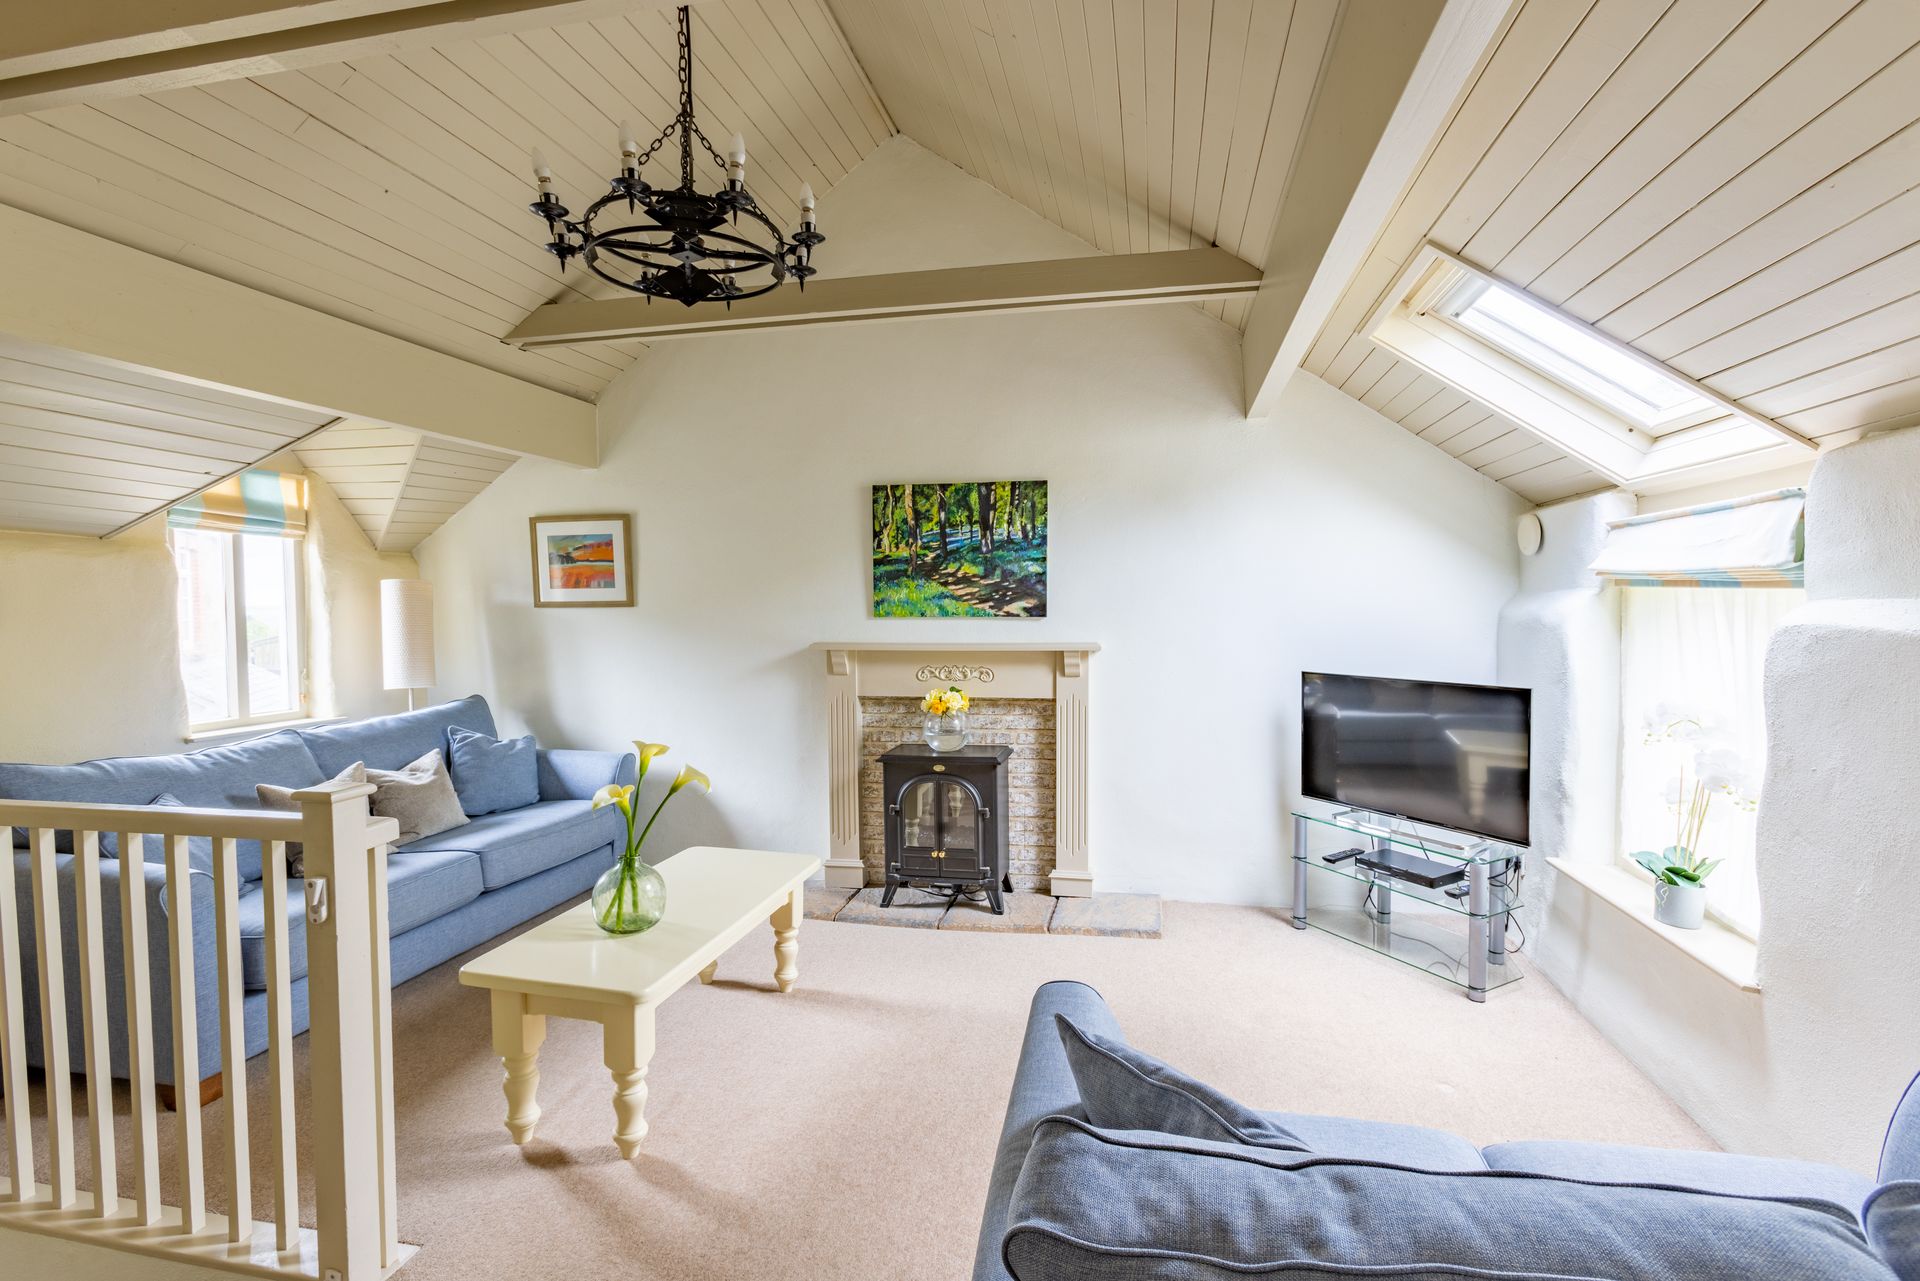 For Rent In Bude Cornwall Grebe Cottage Broomhill Manor Sitting Room